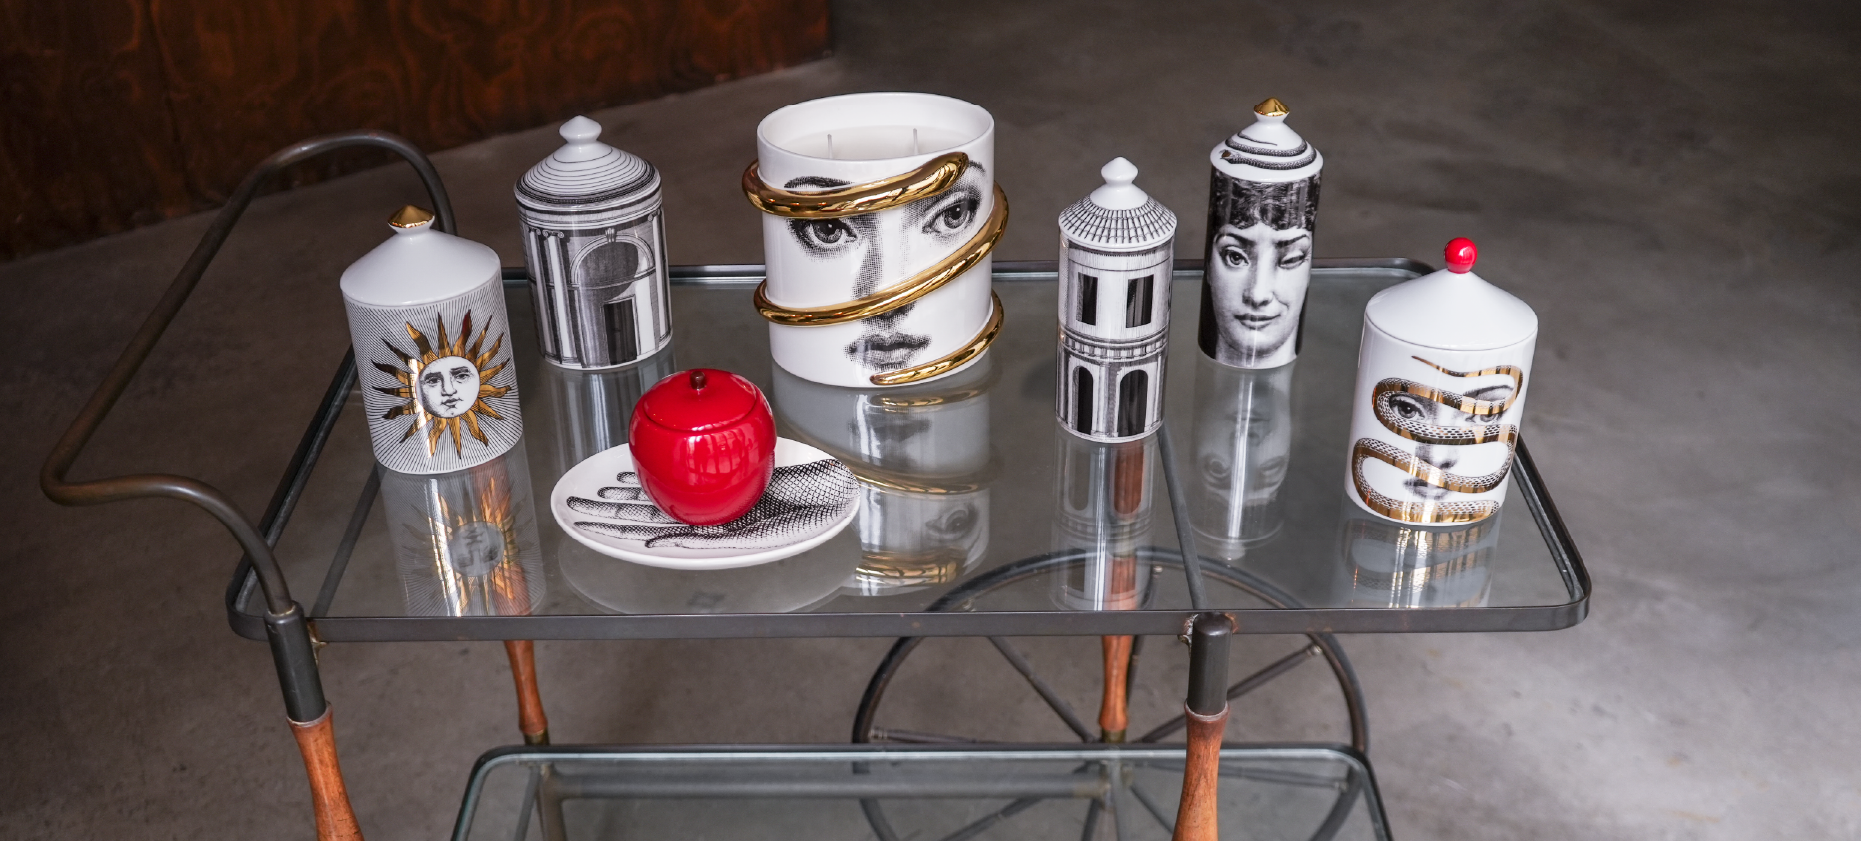 Fornasetti, available at Nose